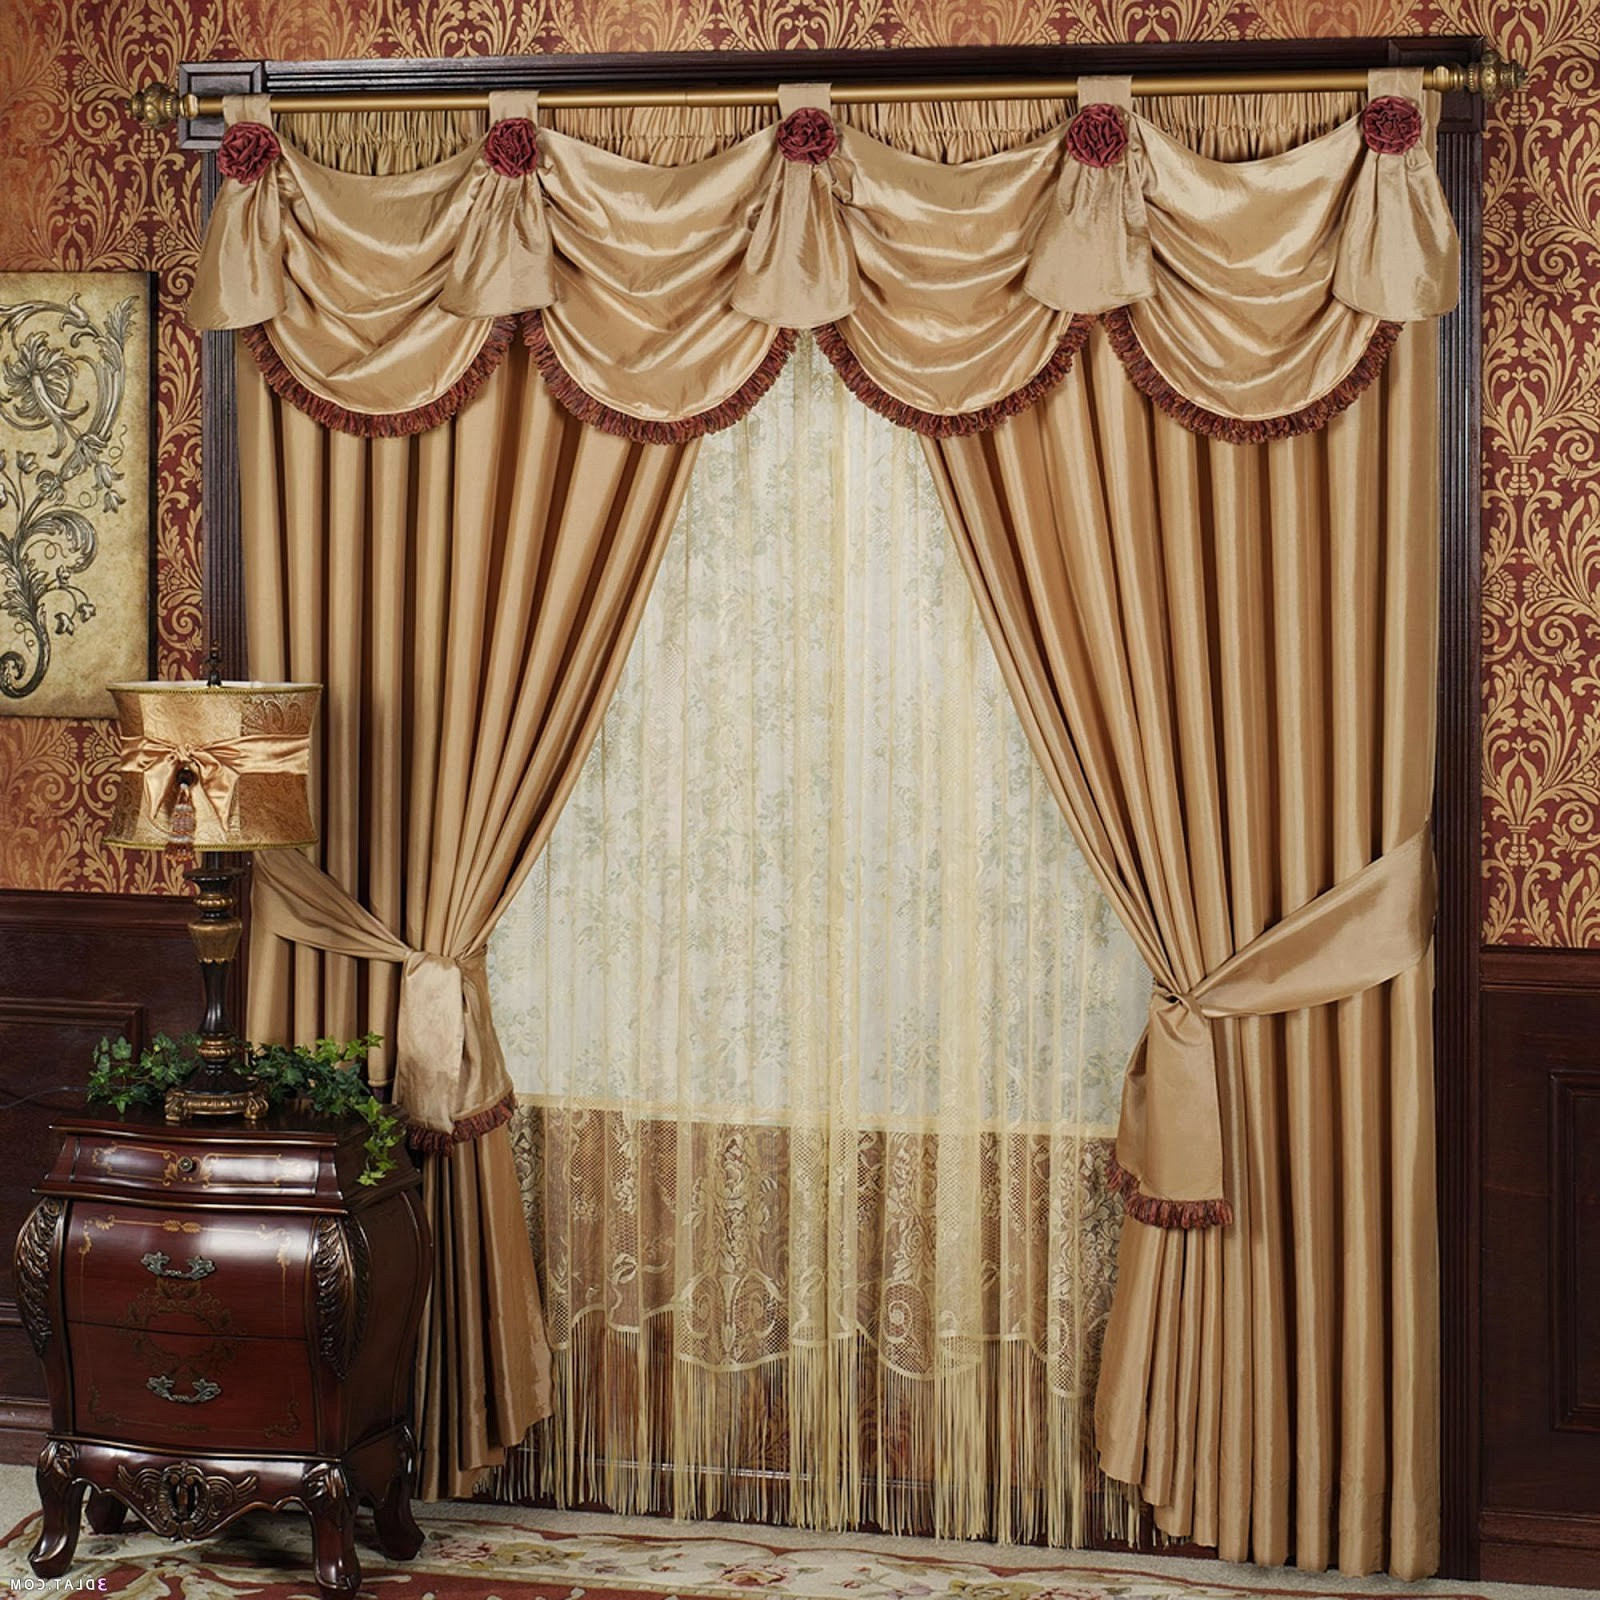 Fancy Curtains For Living Room
 Best Curtains For Small Living Room Gpgunclub Fresh